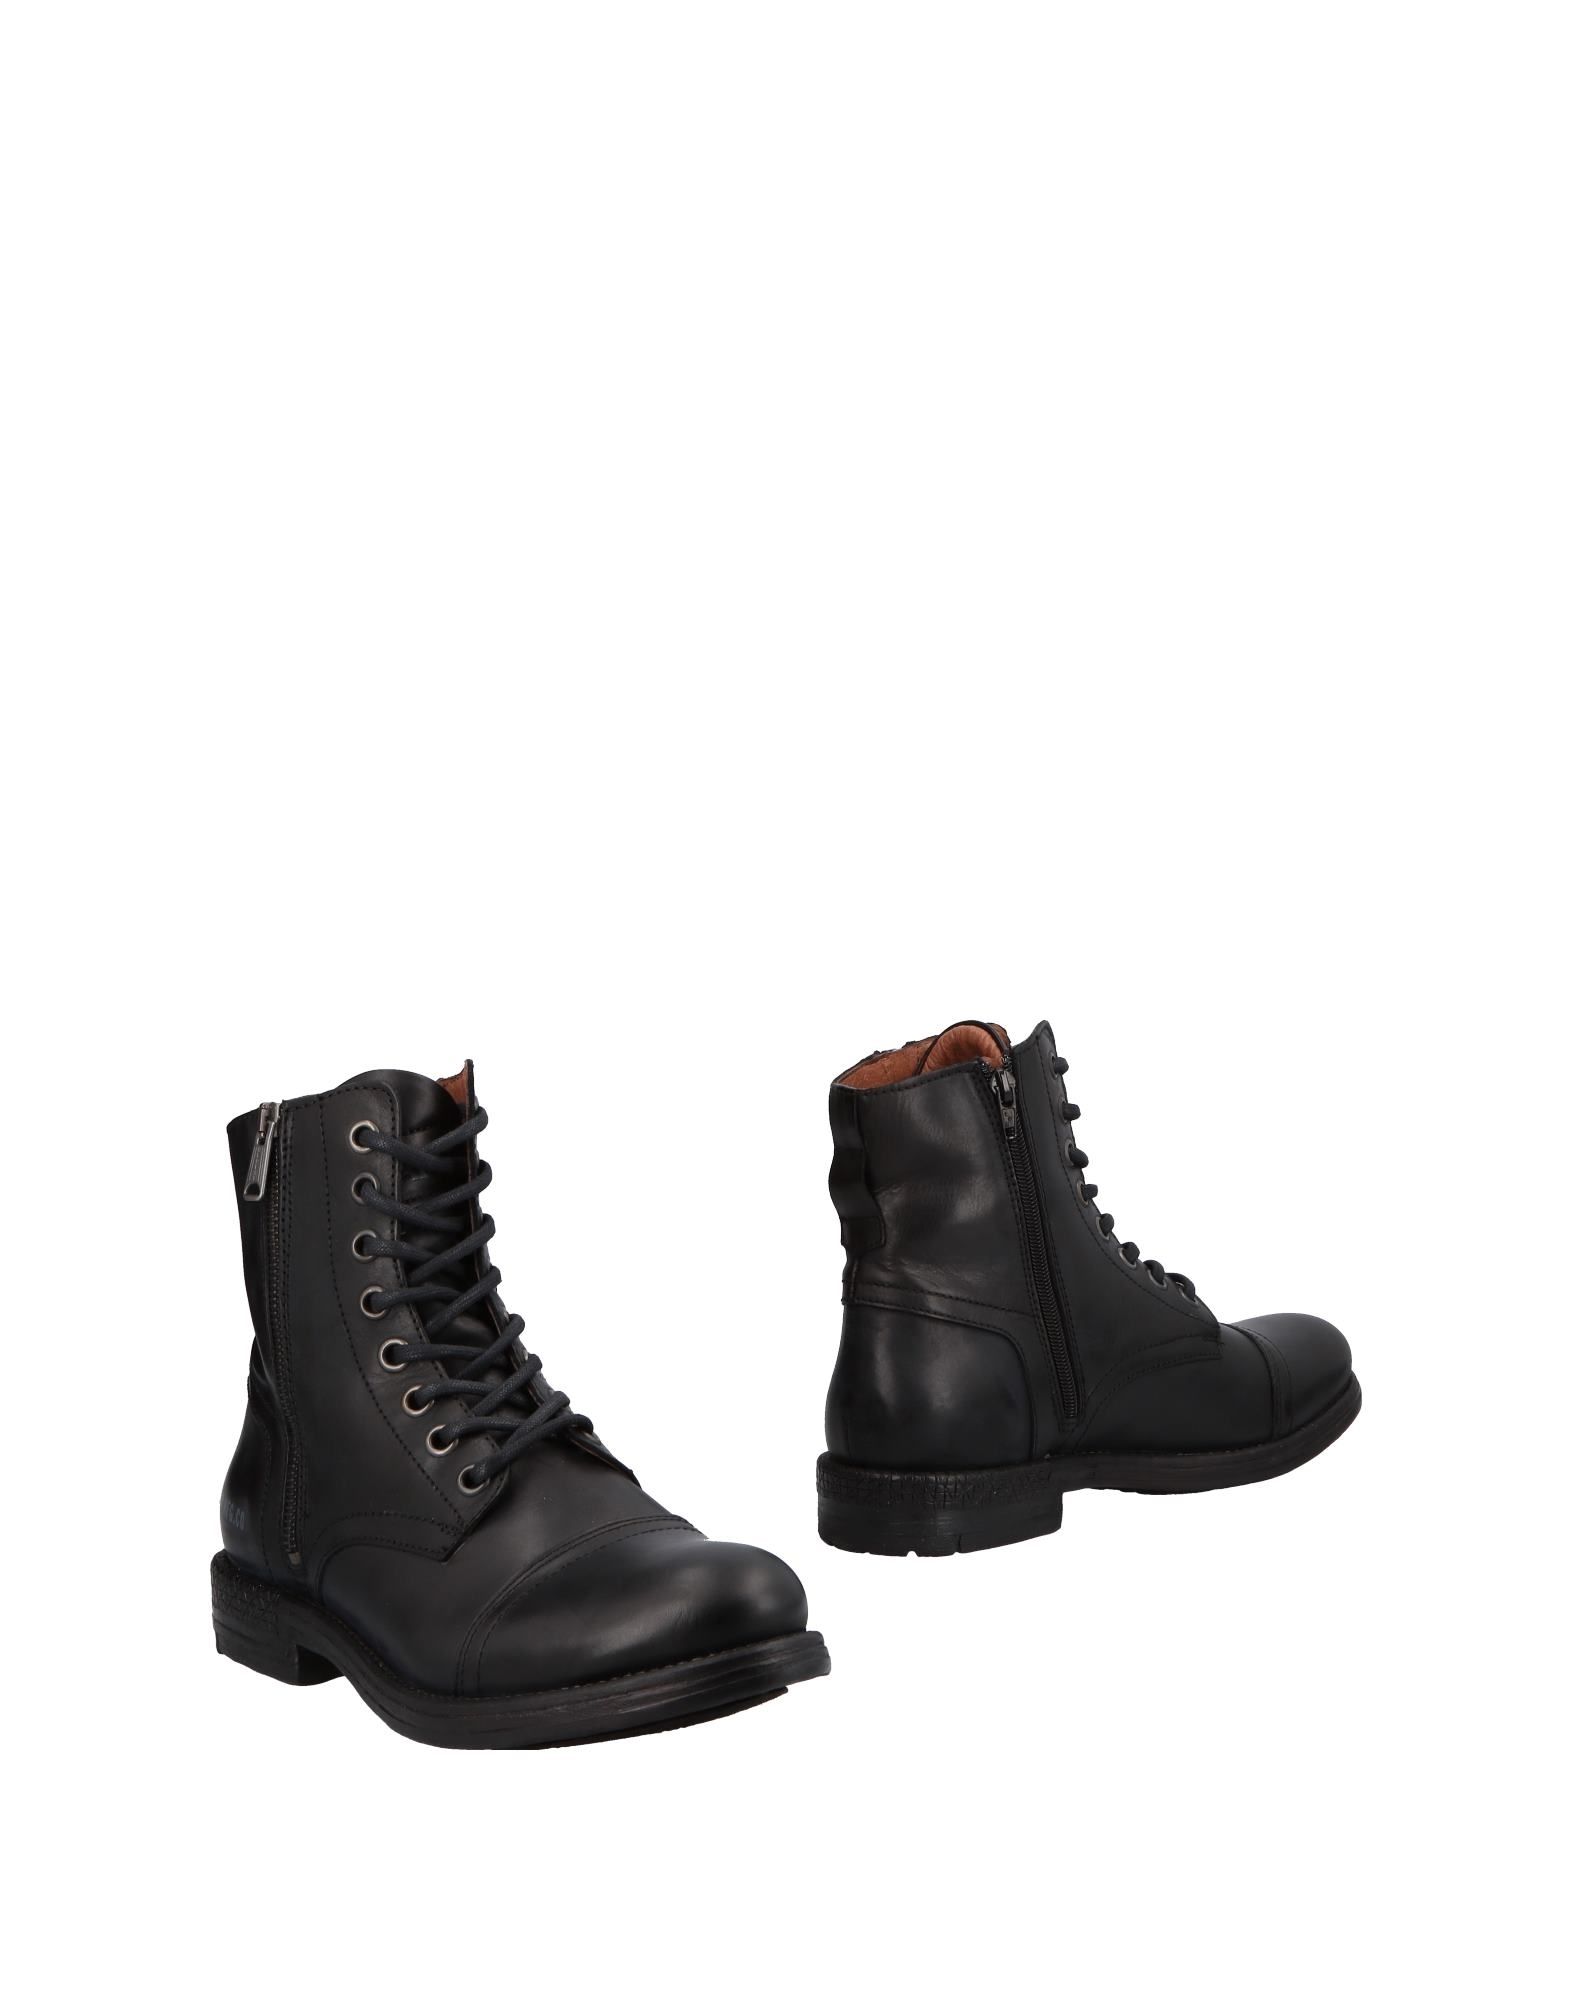 REPLAY Boots,11494007BN 9